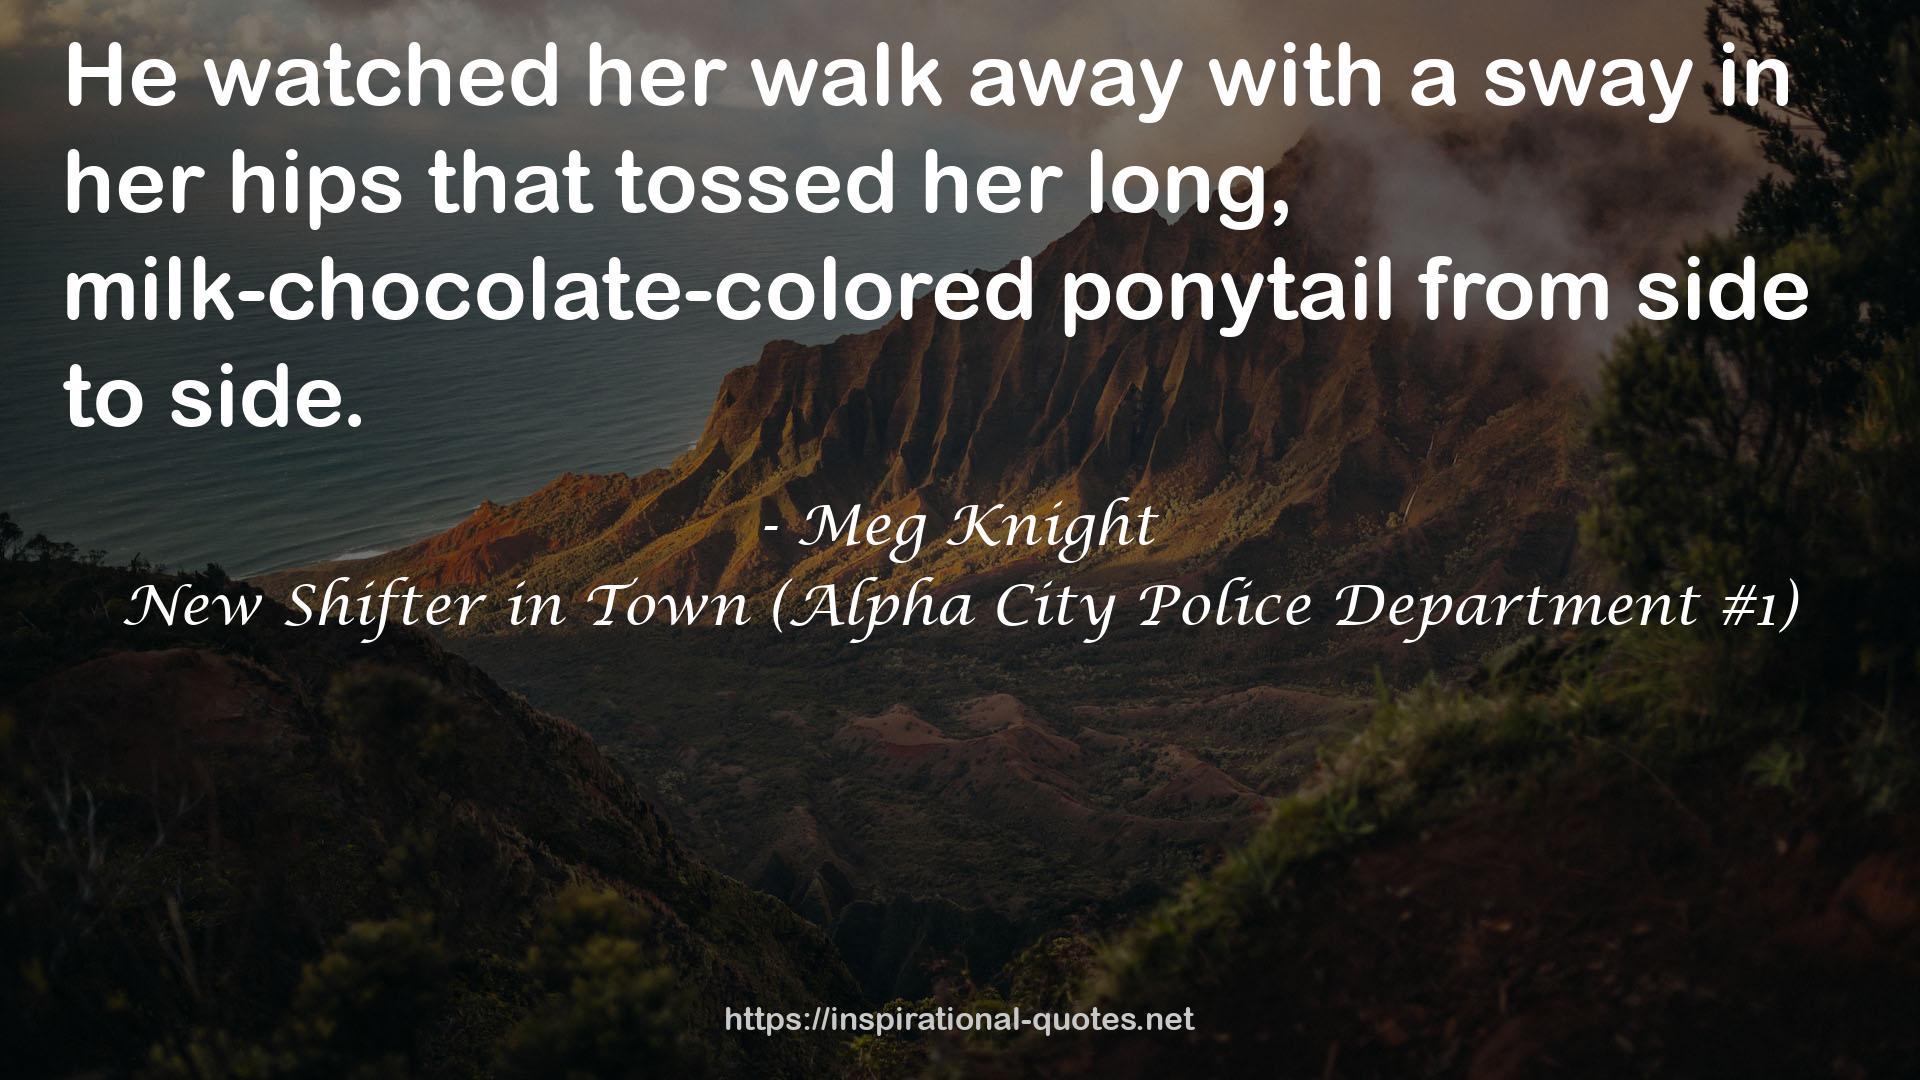 New Shifter in Town (Alpha City Police Department #1) QUOTES